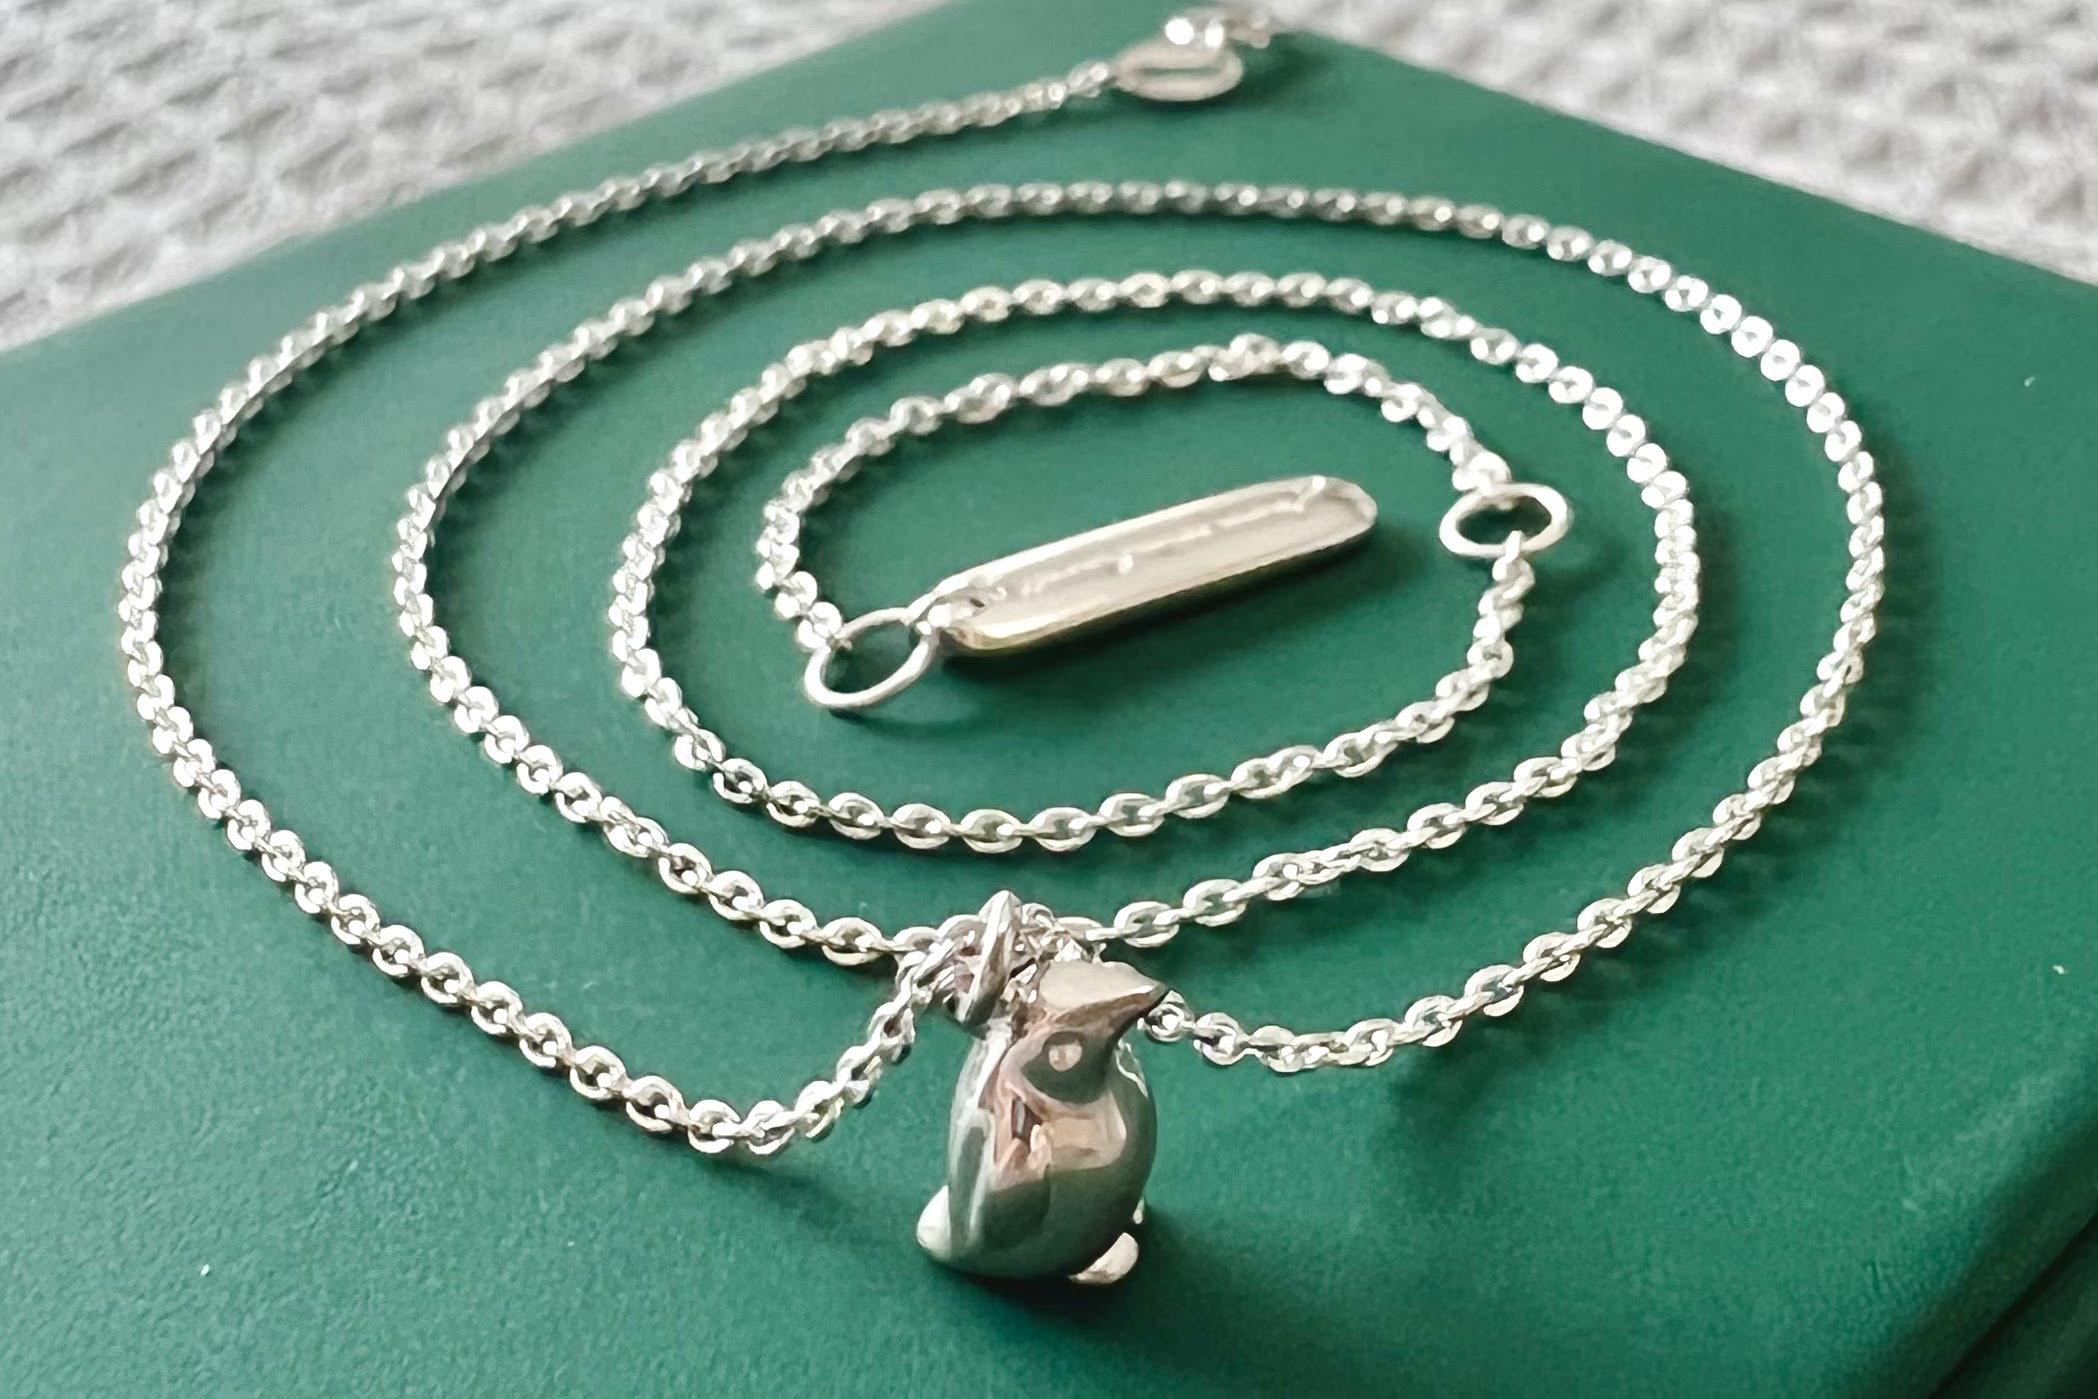 An adjustable length silver necklace with a tiny penguin pendant